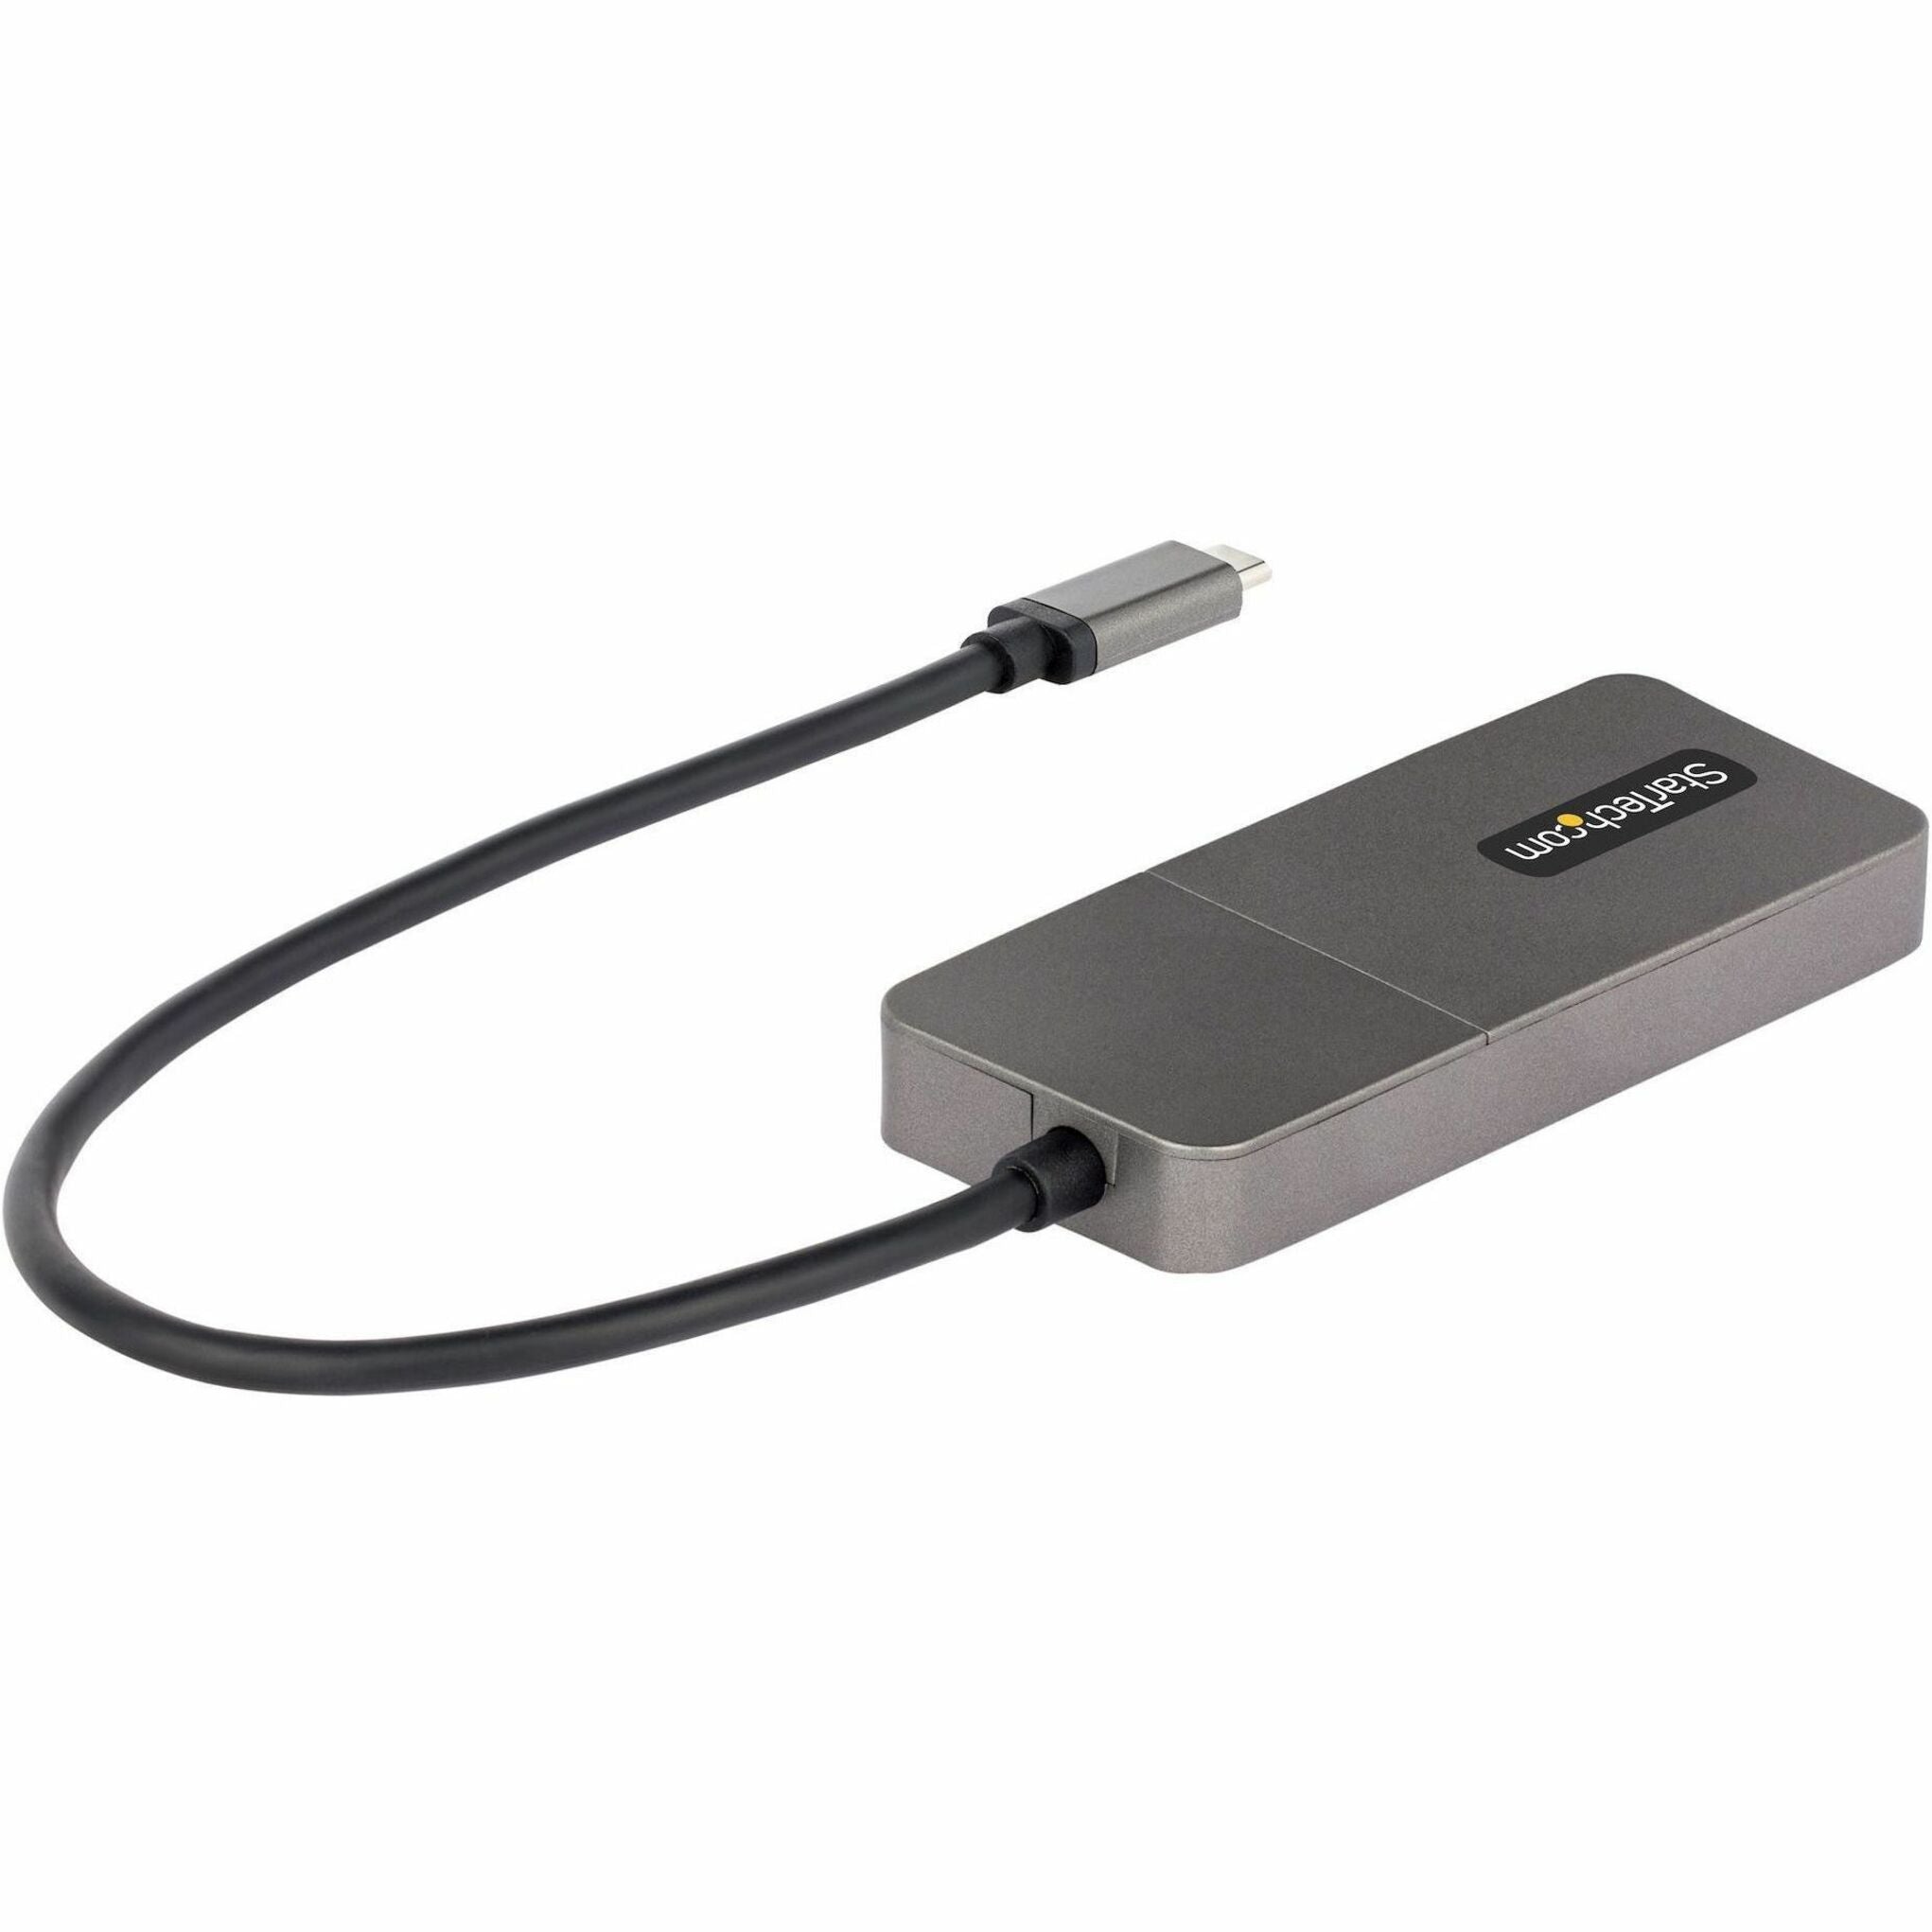 StarTech.com MST14CD123HD HDMI/USB-C A/V Adapter, Active, DSC, HDR Support, MST Support, Plug and Play, Space Gray